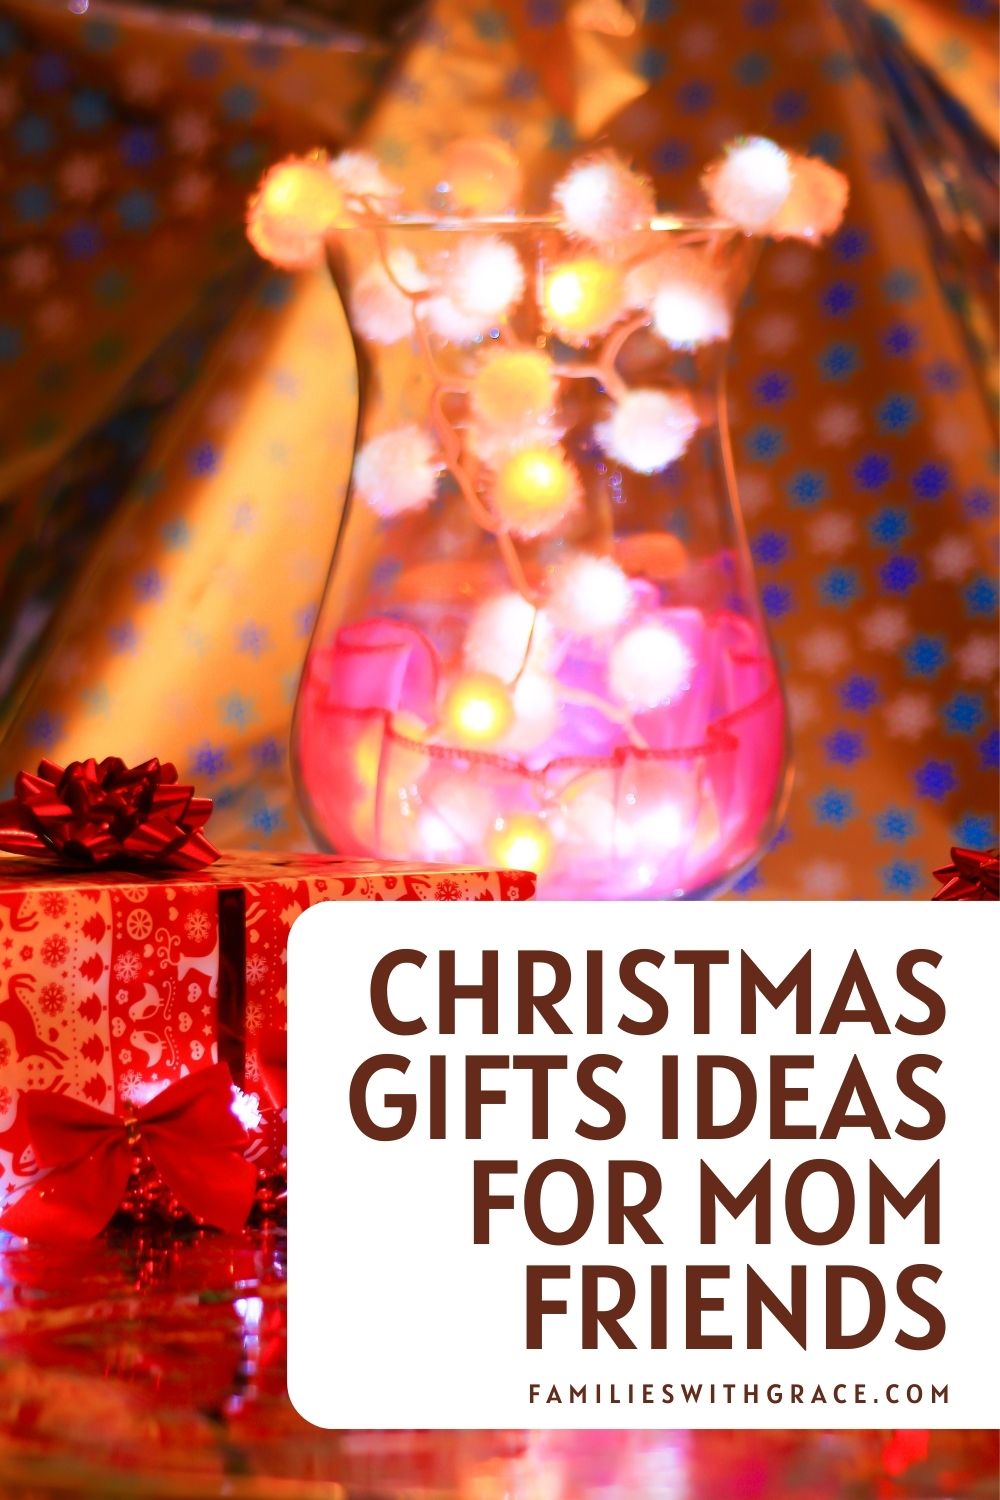 The best Christmas gift ideas for mom friends - Families With Grace